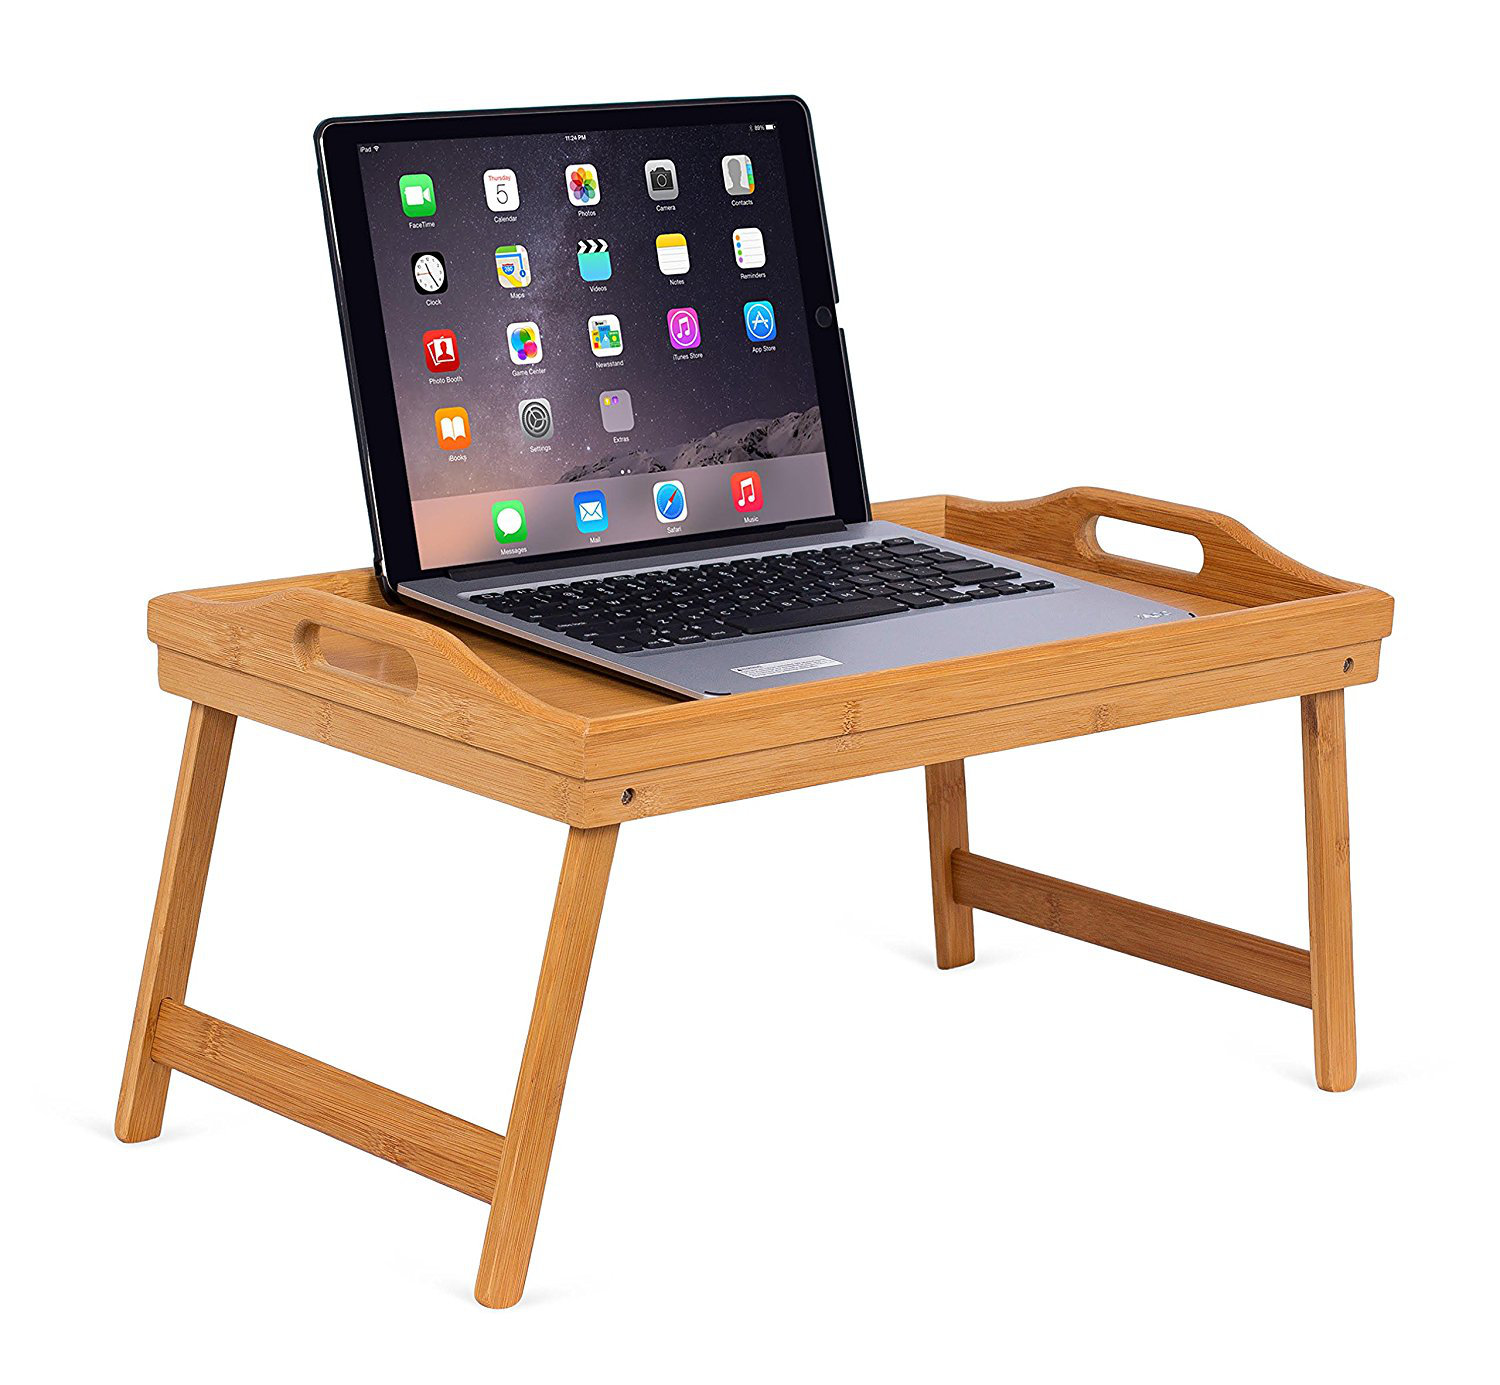 Pull Down Legs Great for Computer iPad Book Coloring Stand Natural BIRDROCK HOME Bamboo Laptop Bed Lap Tray Multi-Position Adjustable Tilt Surface Storage Drawer 